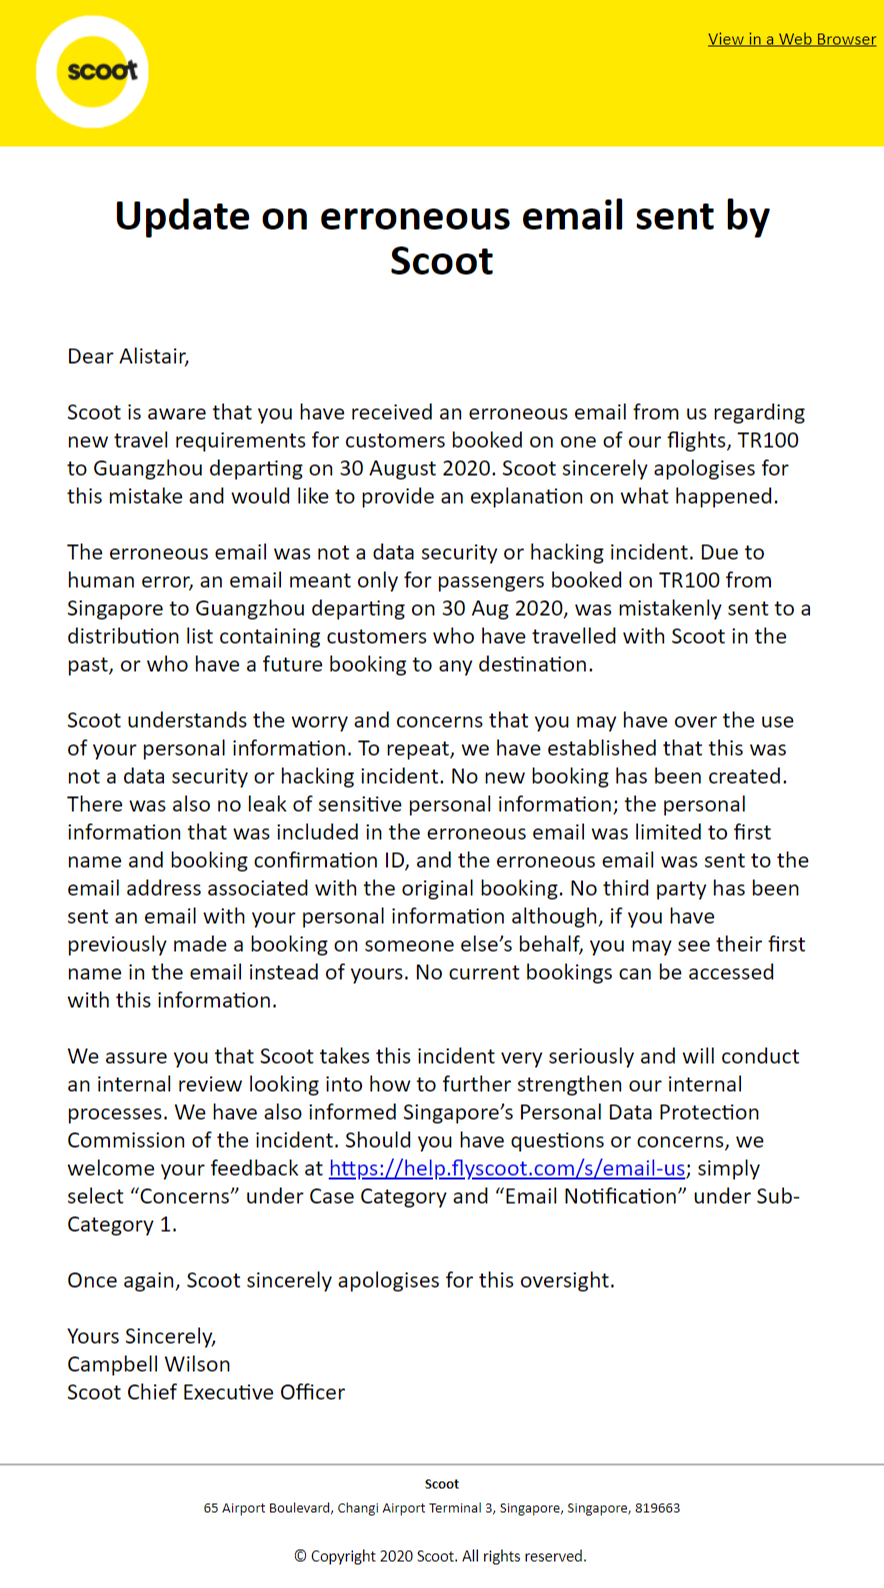 Scoot-apology email